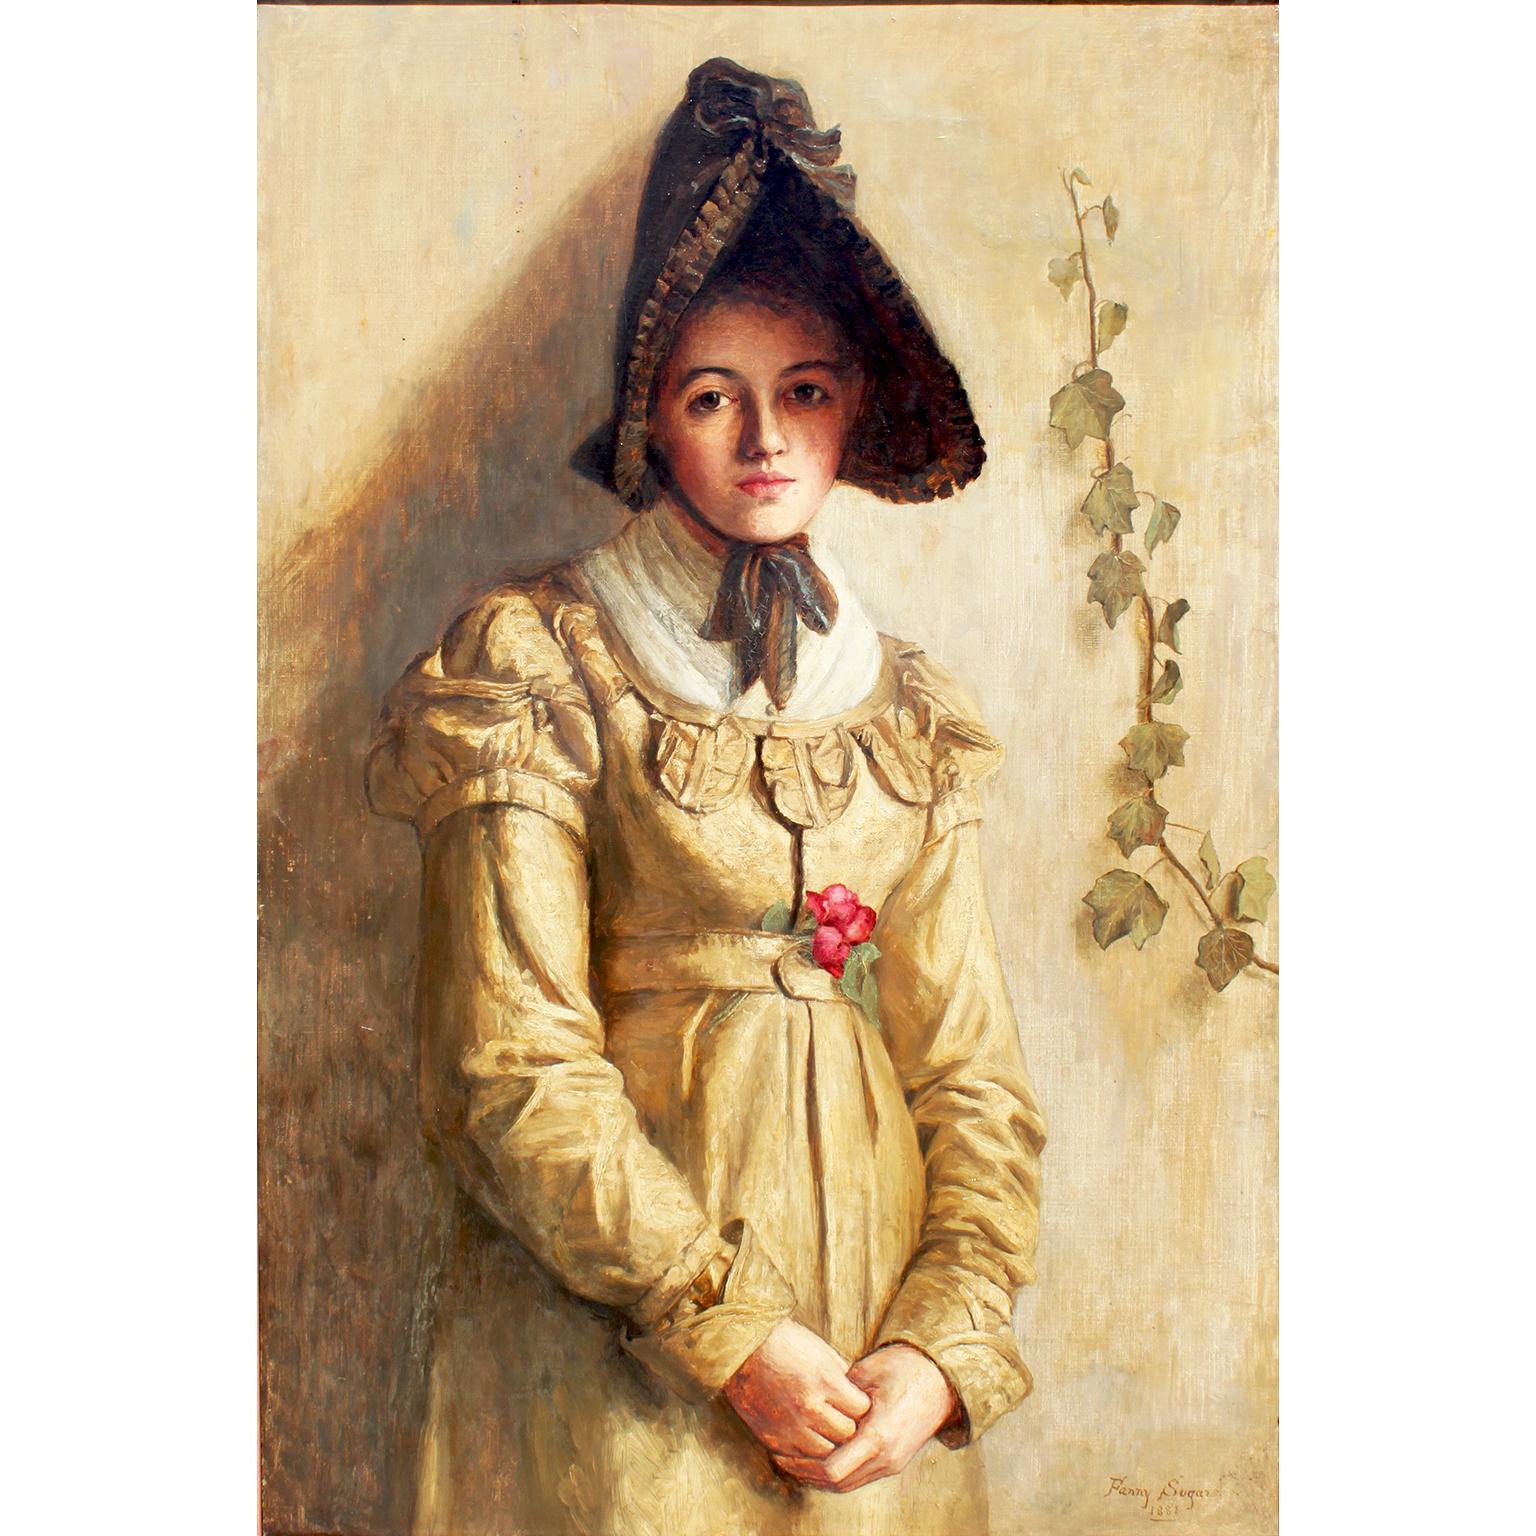 Fanny Sugars (British, 1856-1933) A Charming Victorian Era Oil on Canvas Depicting a Portrait of Standing Young Girl Wearing a Bonnet, within a later giltwood frame. Signed and Dated: 'Fanny Sugars / 1881' (lower right).

Museums:

Lancaster City